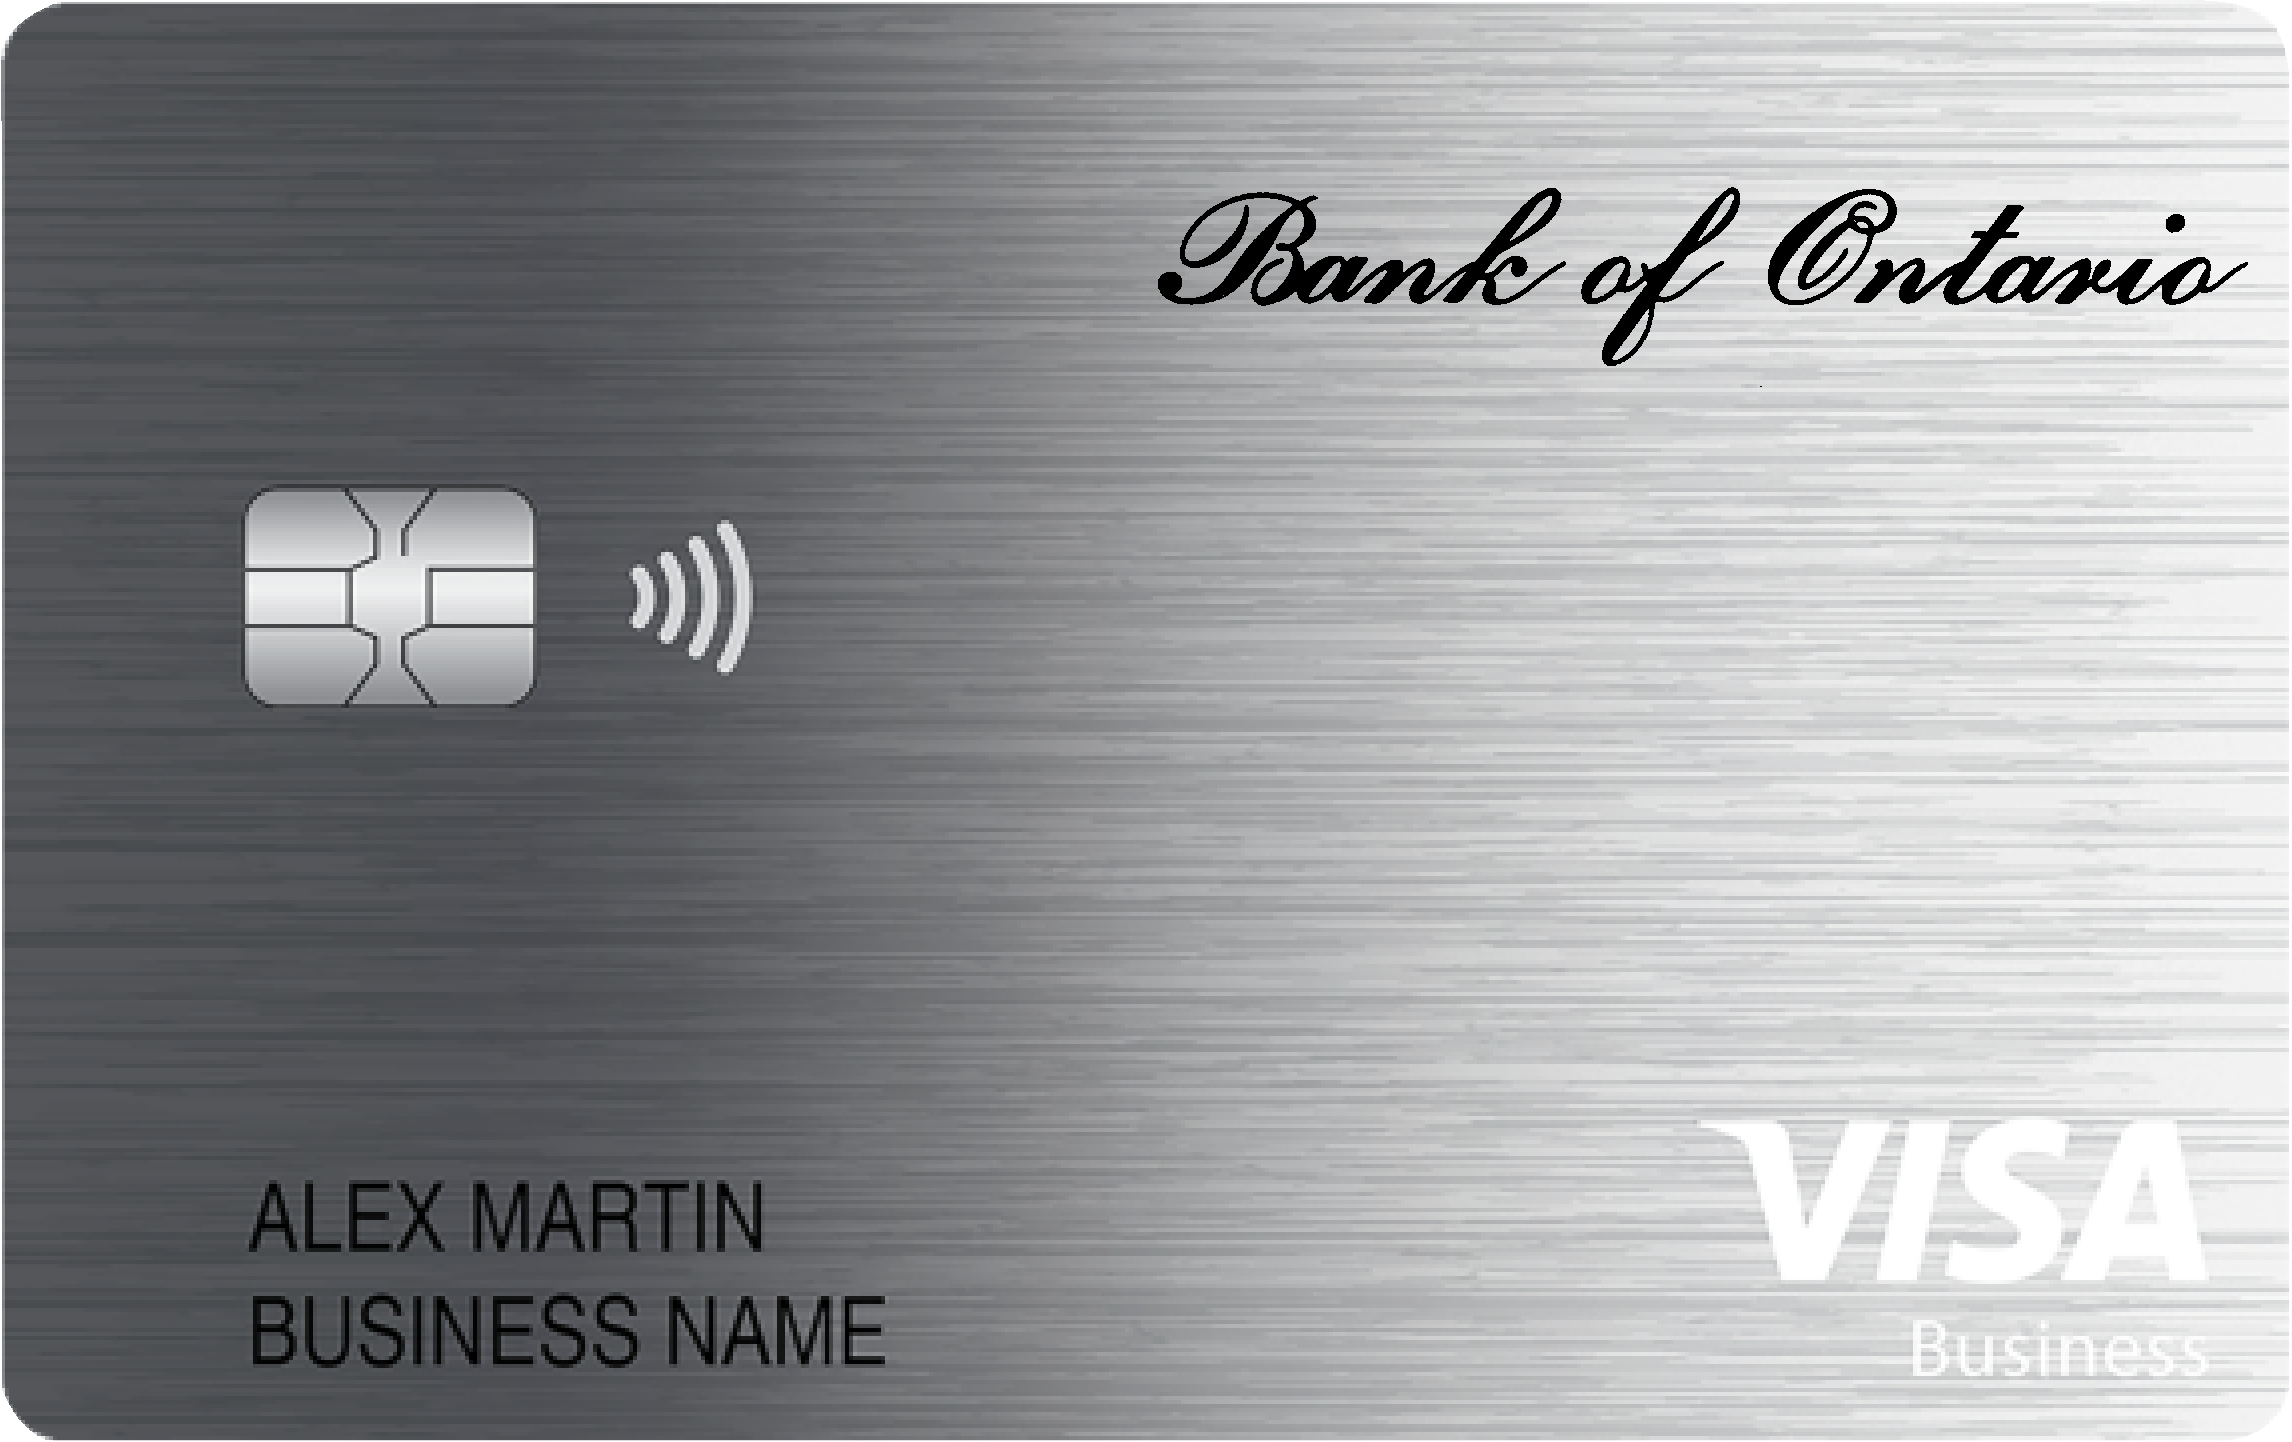 Bank Of Ontario Business Cash Preferred  Card